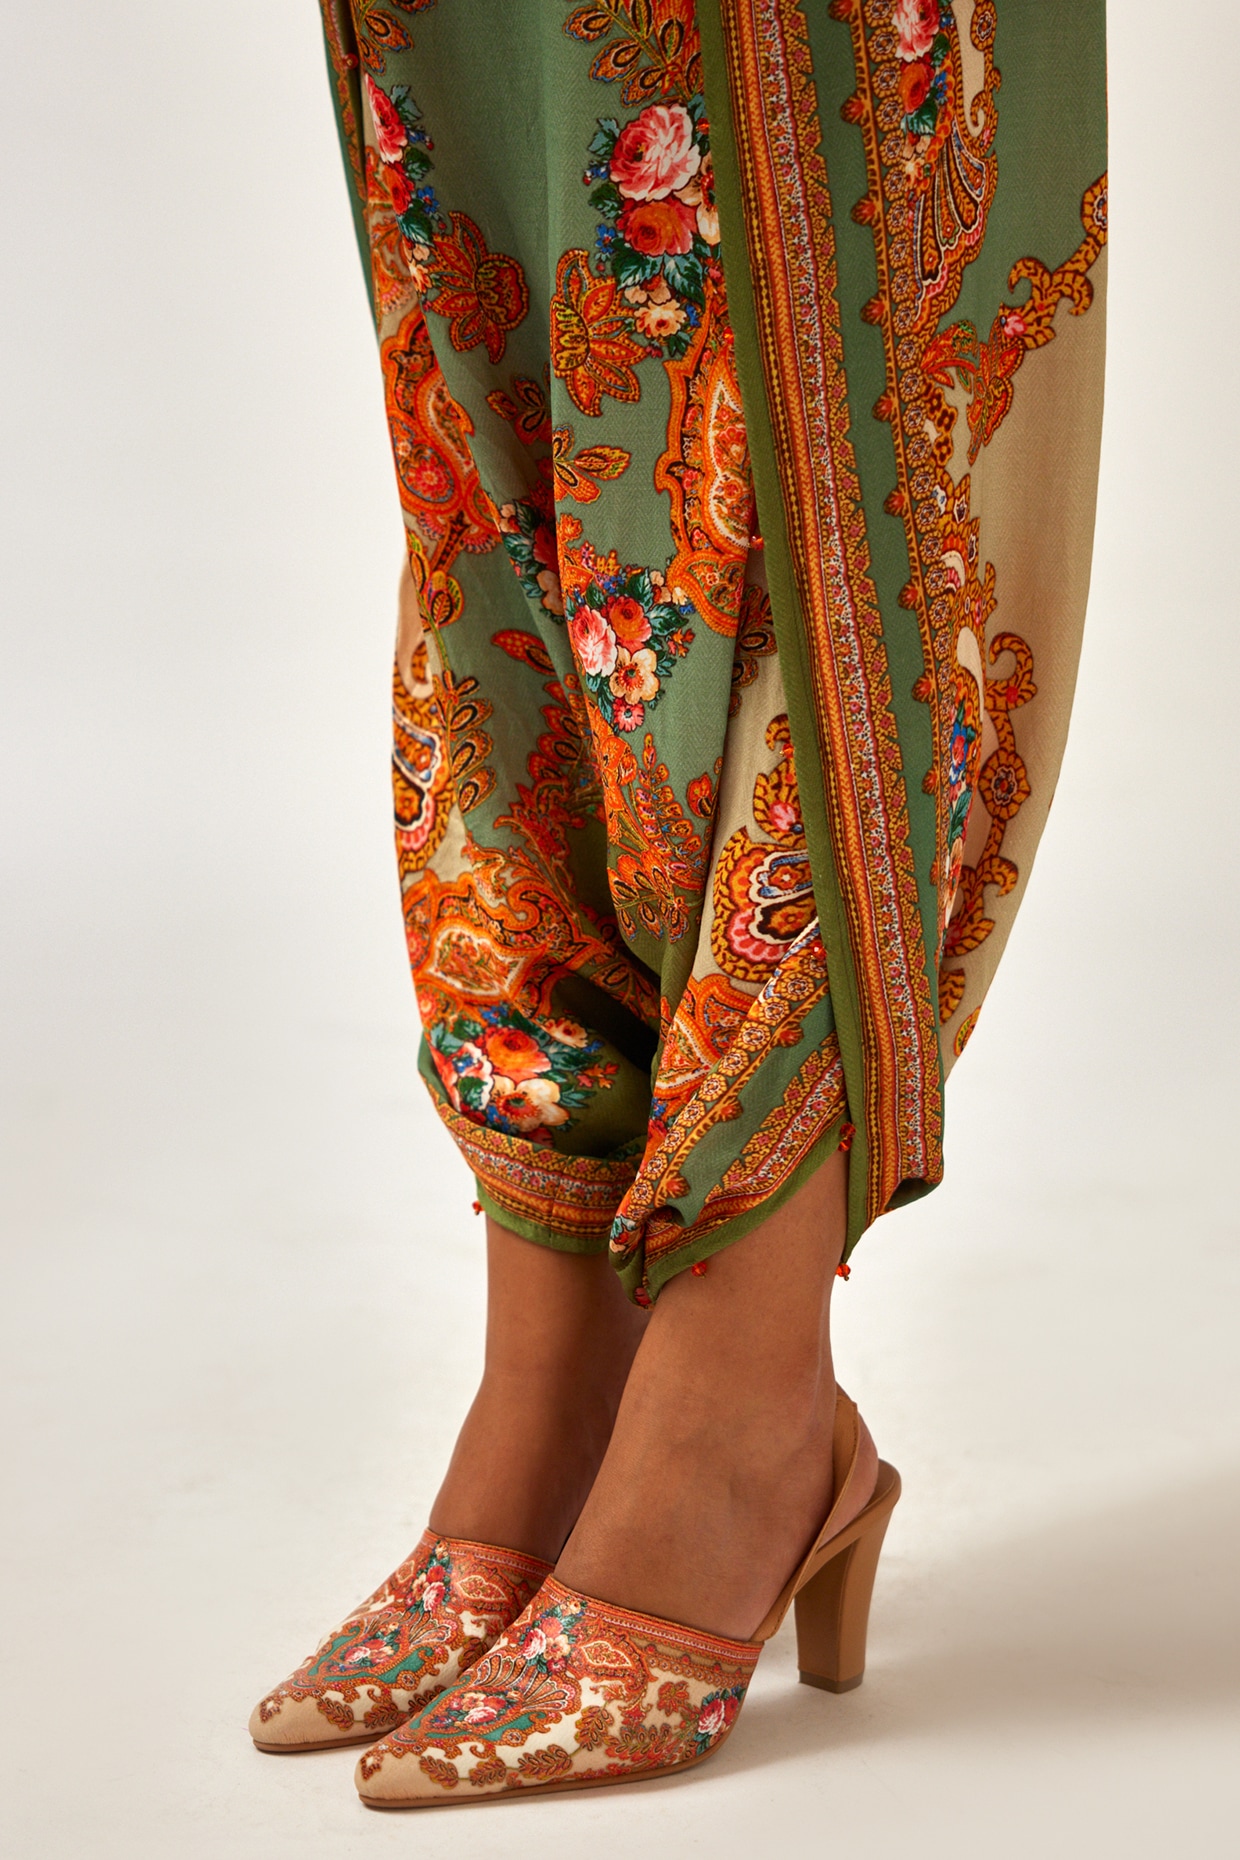 Ladies Printed Dhoti Manufacturer Supplier from Indore India